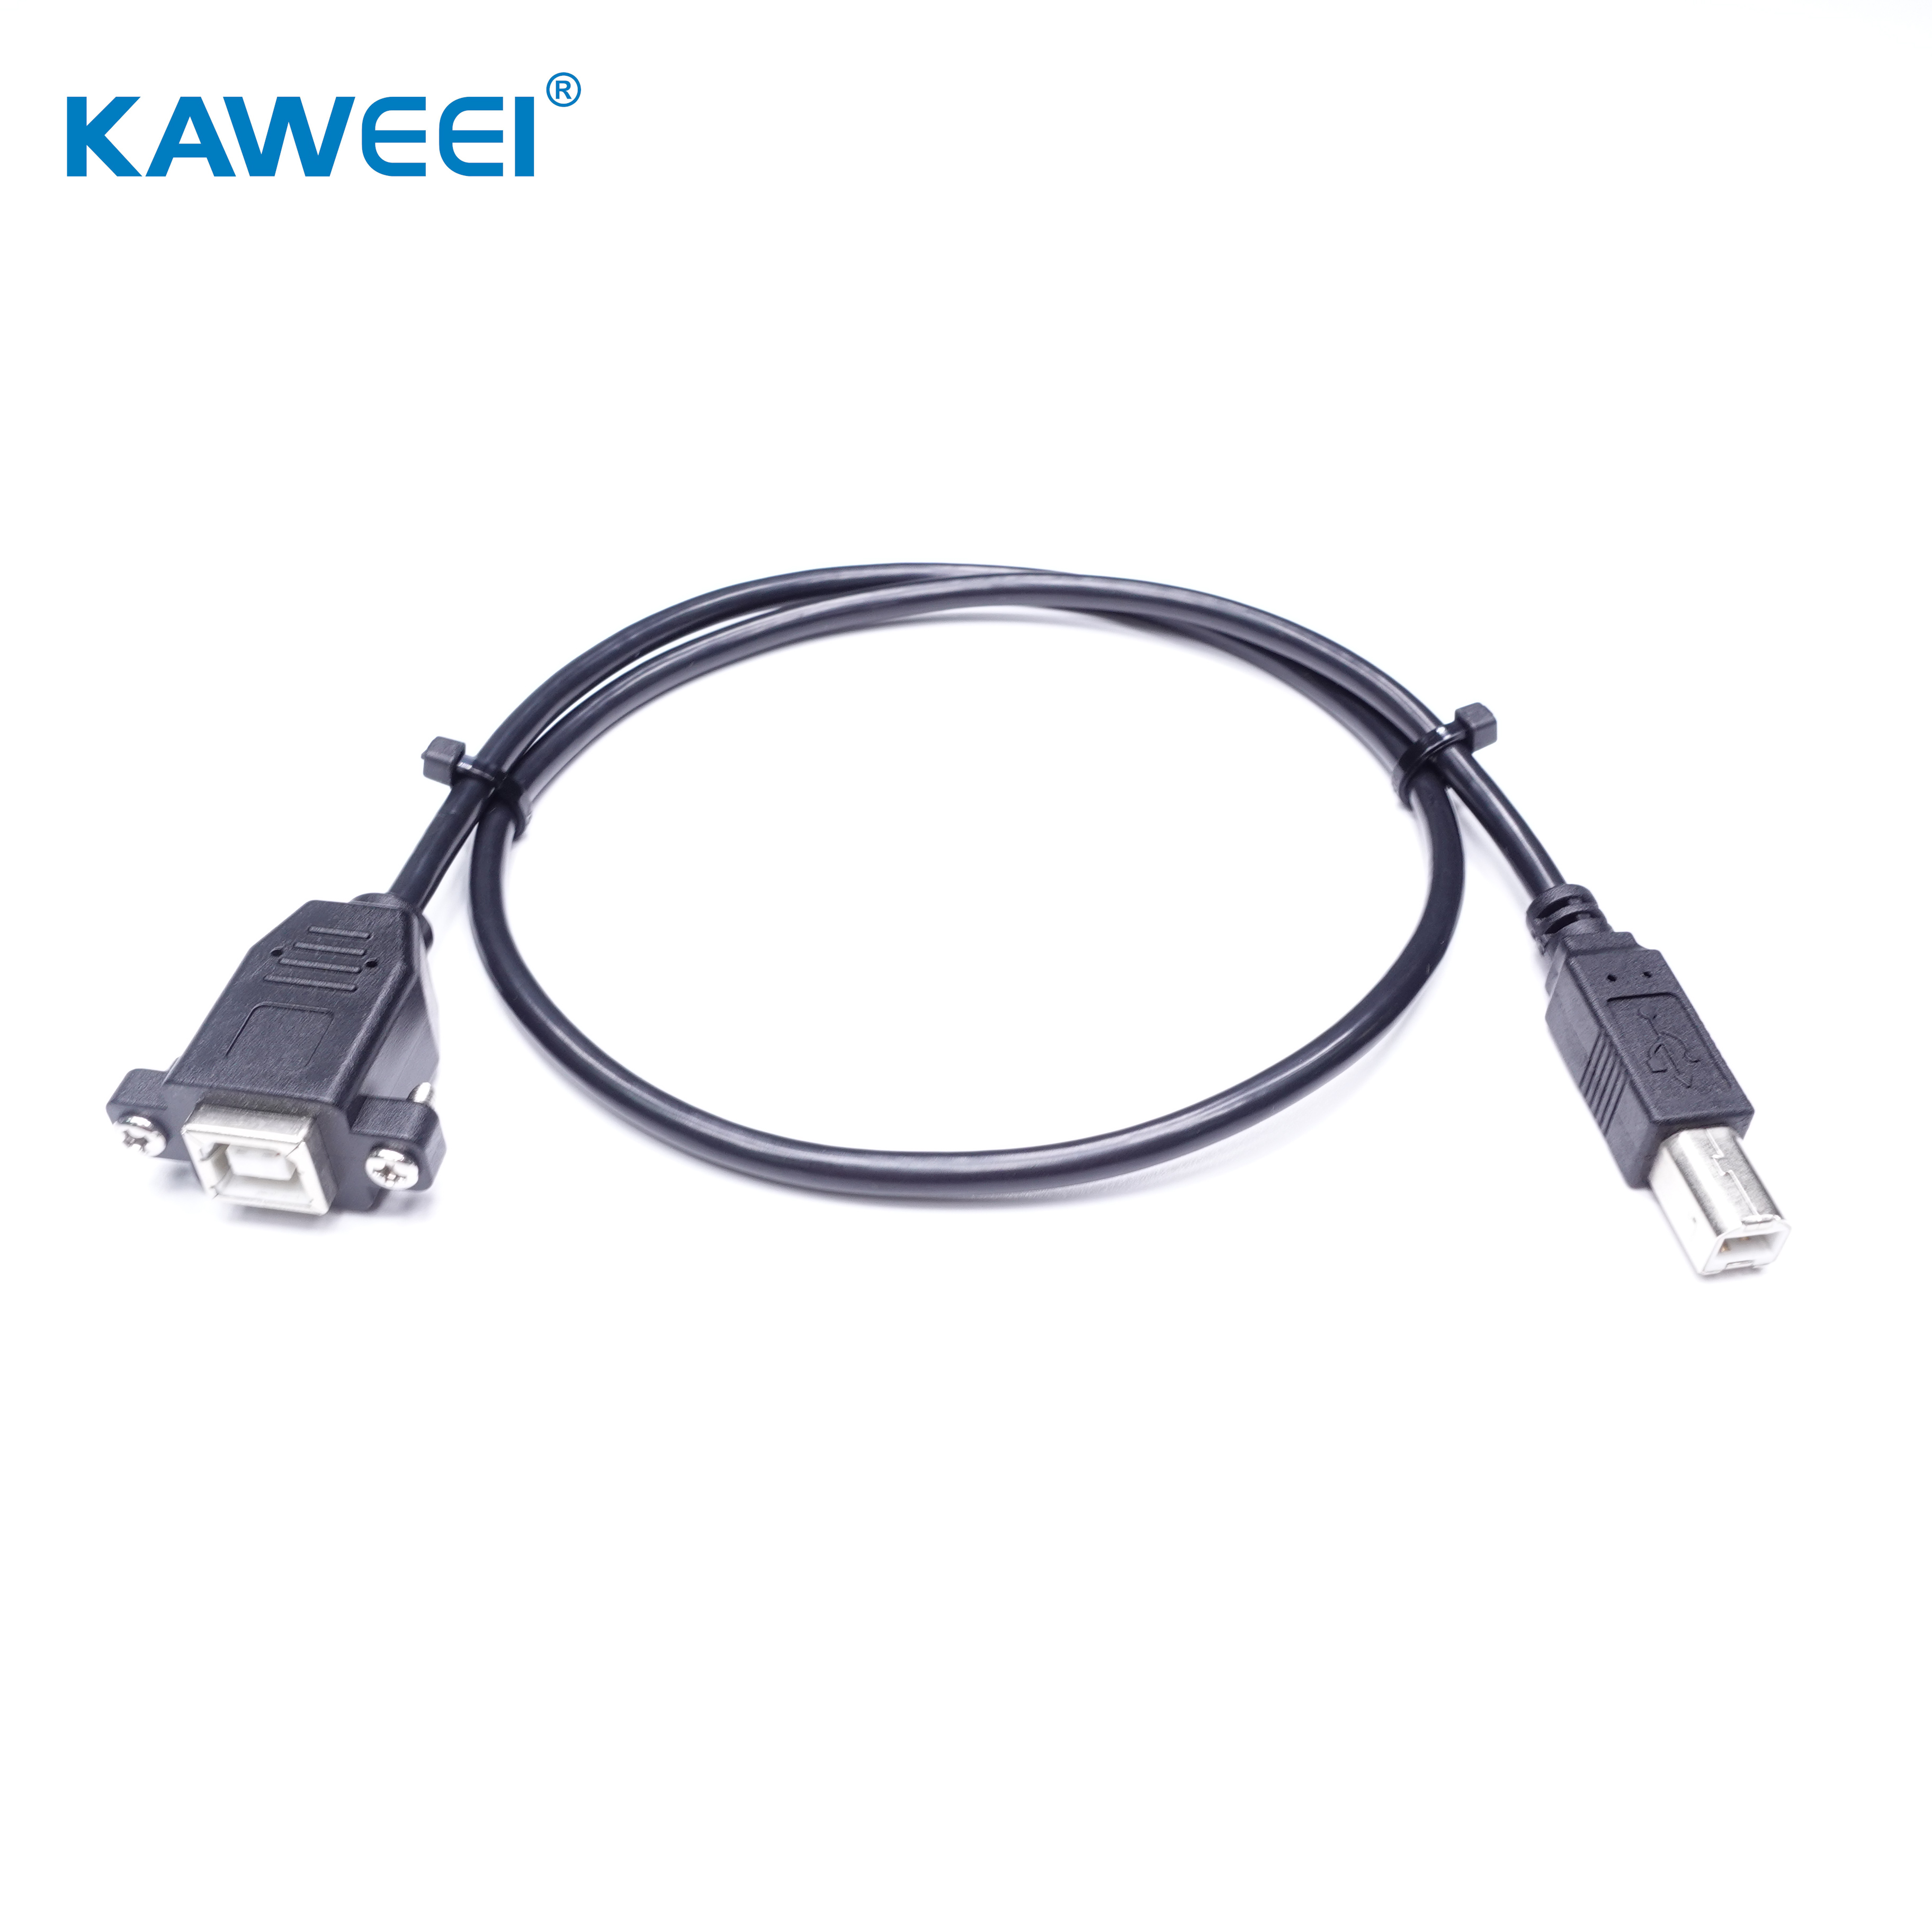 Fast Data Transfer USB Printer Cable Featured Image